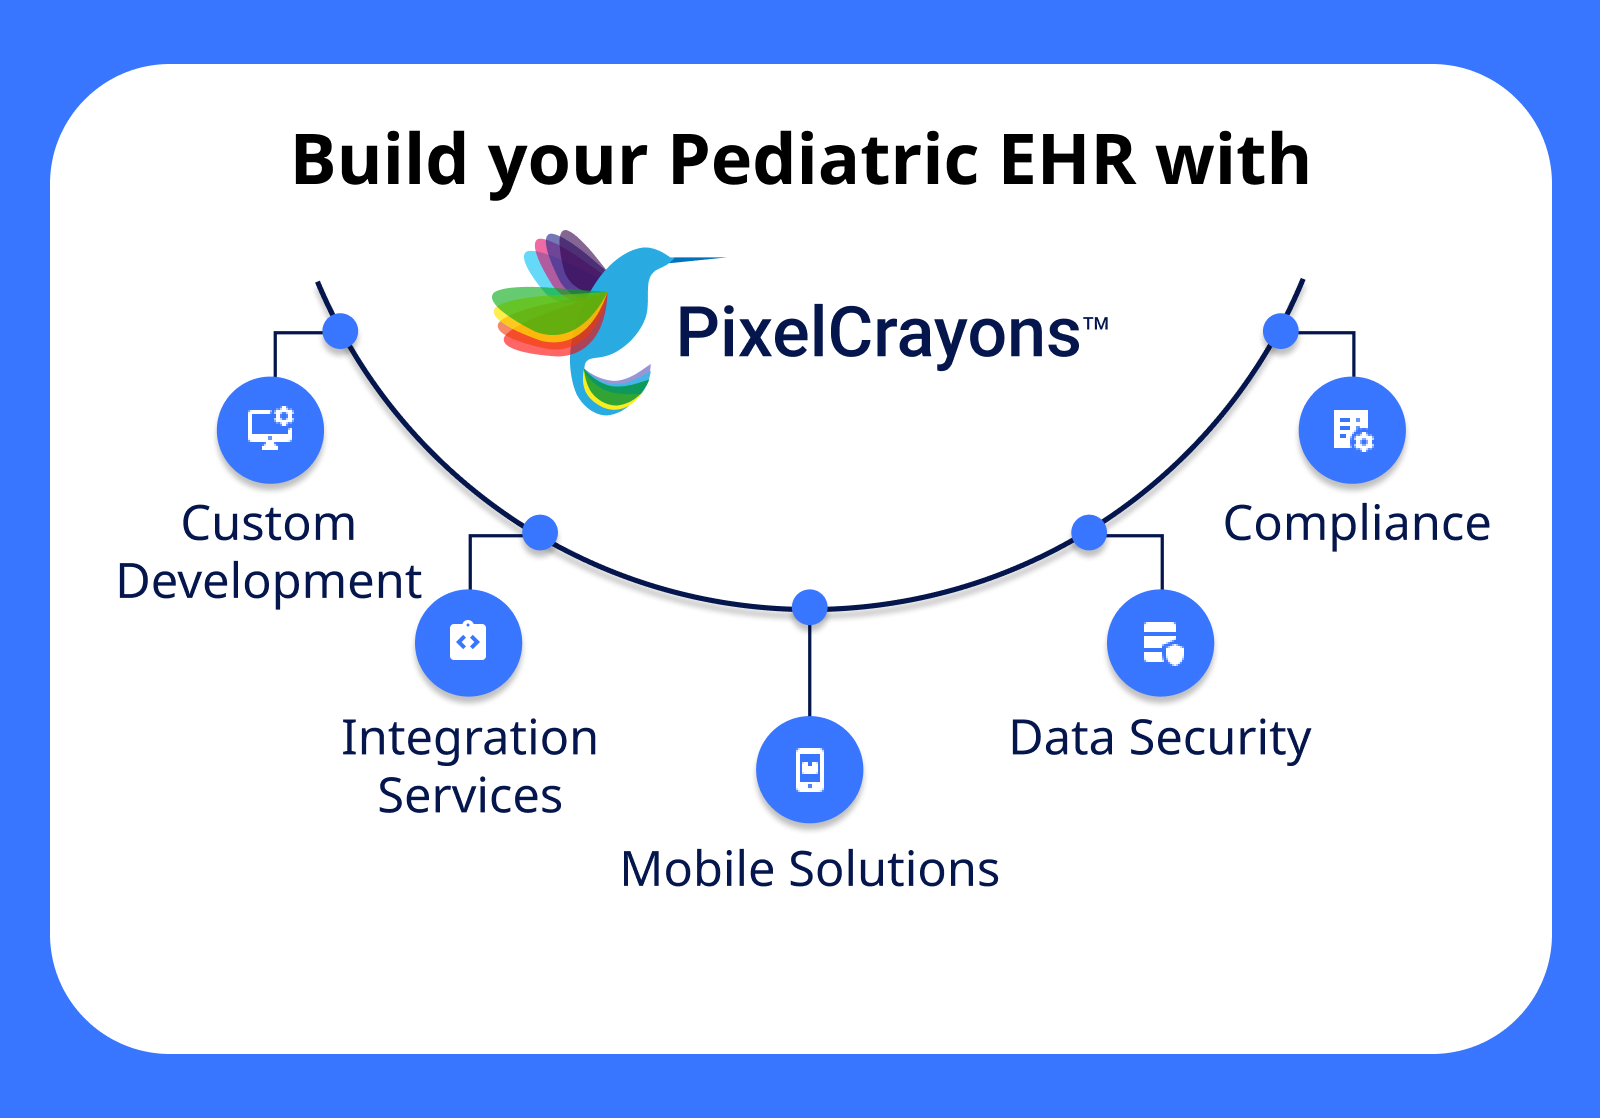 Build your Pediatric EHR with PixelCrayons